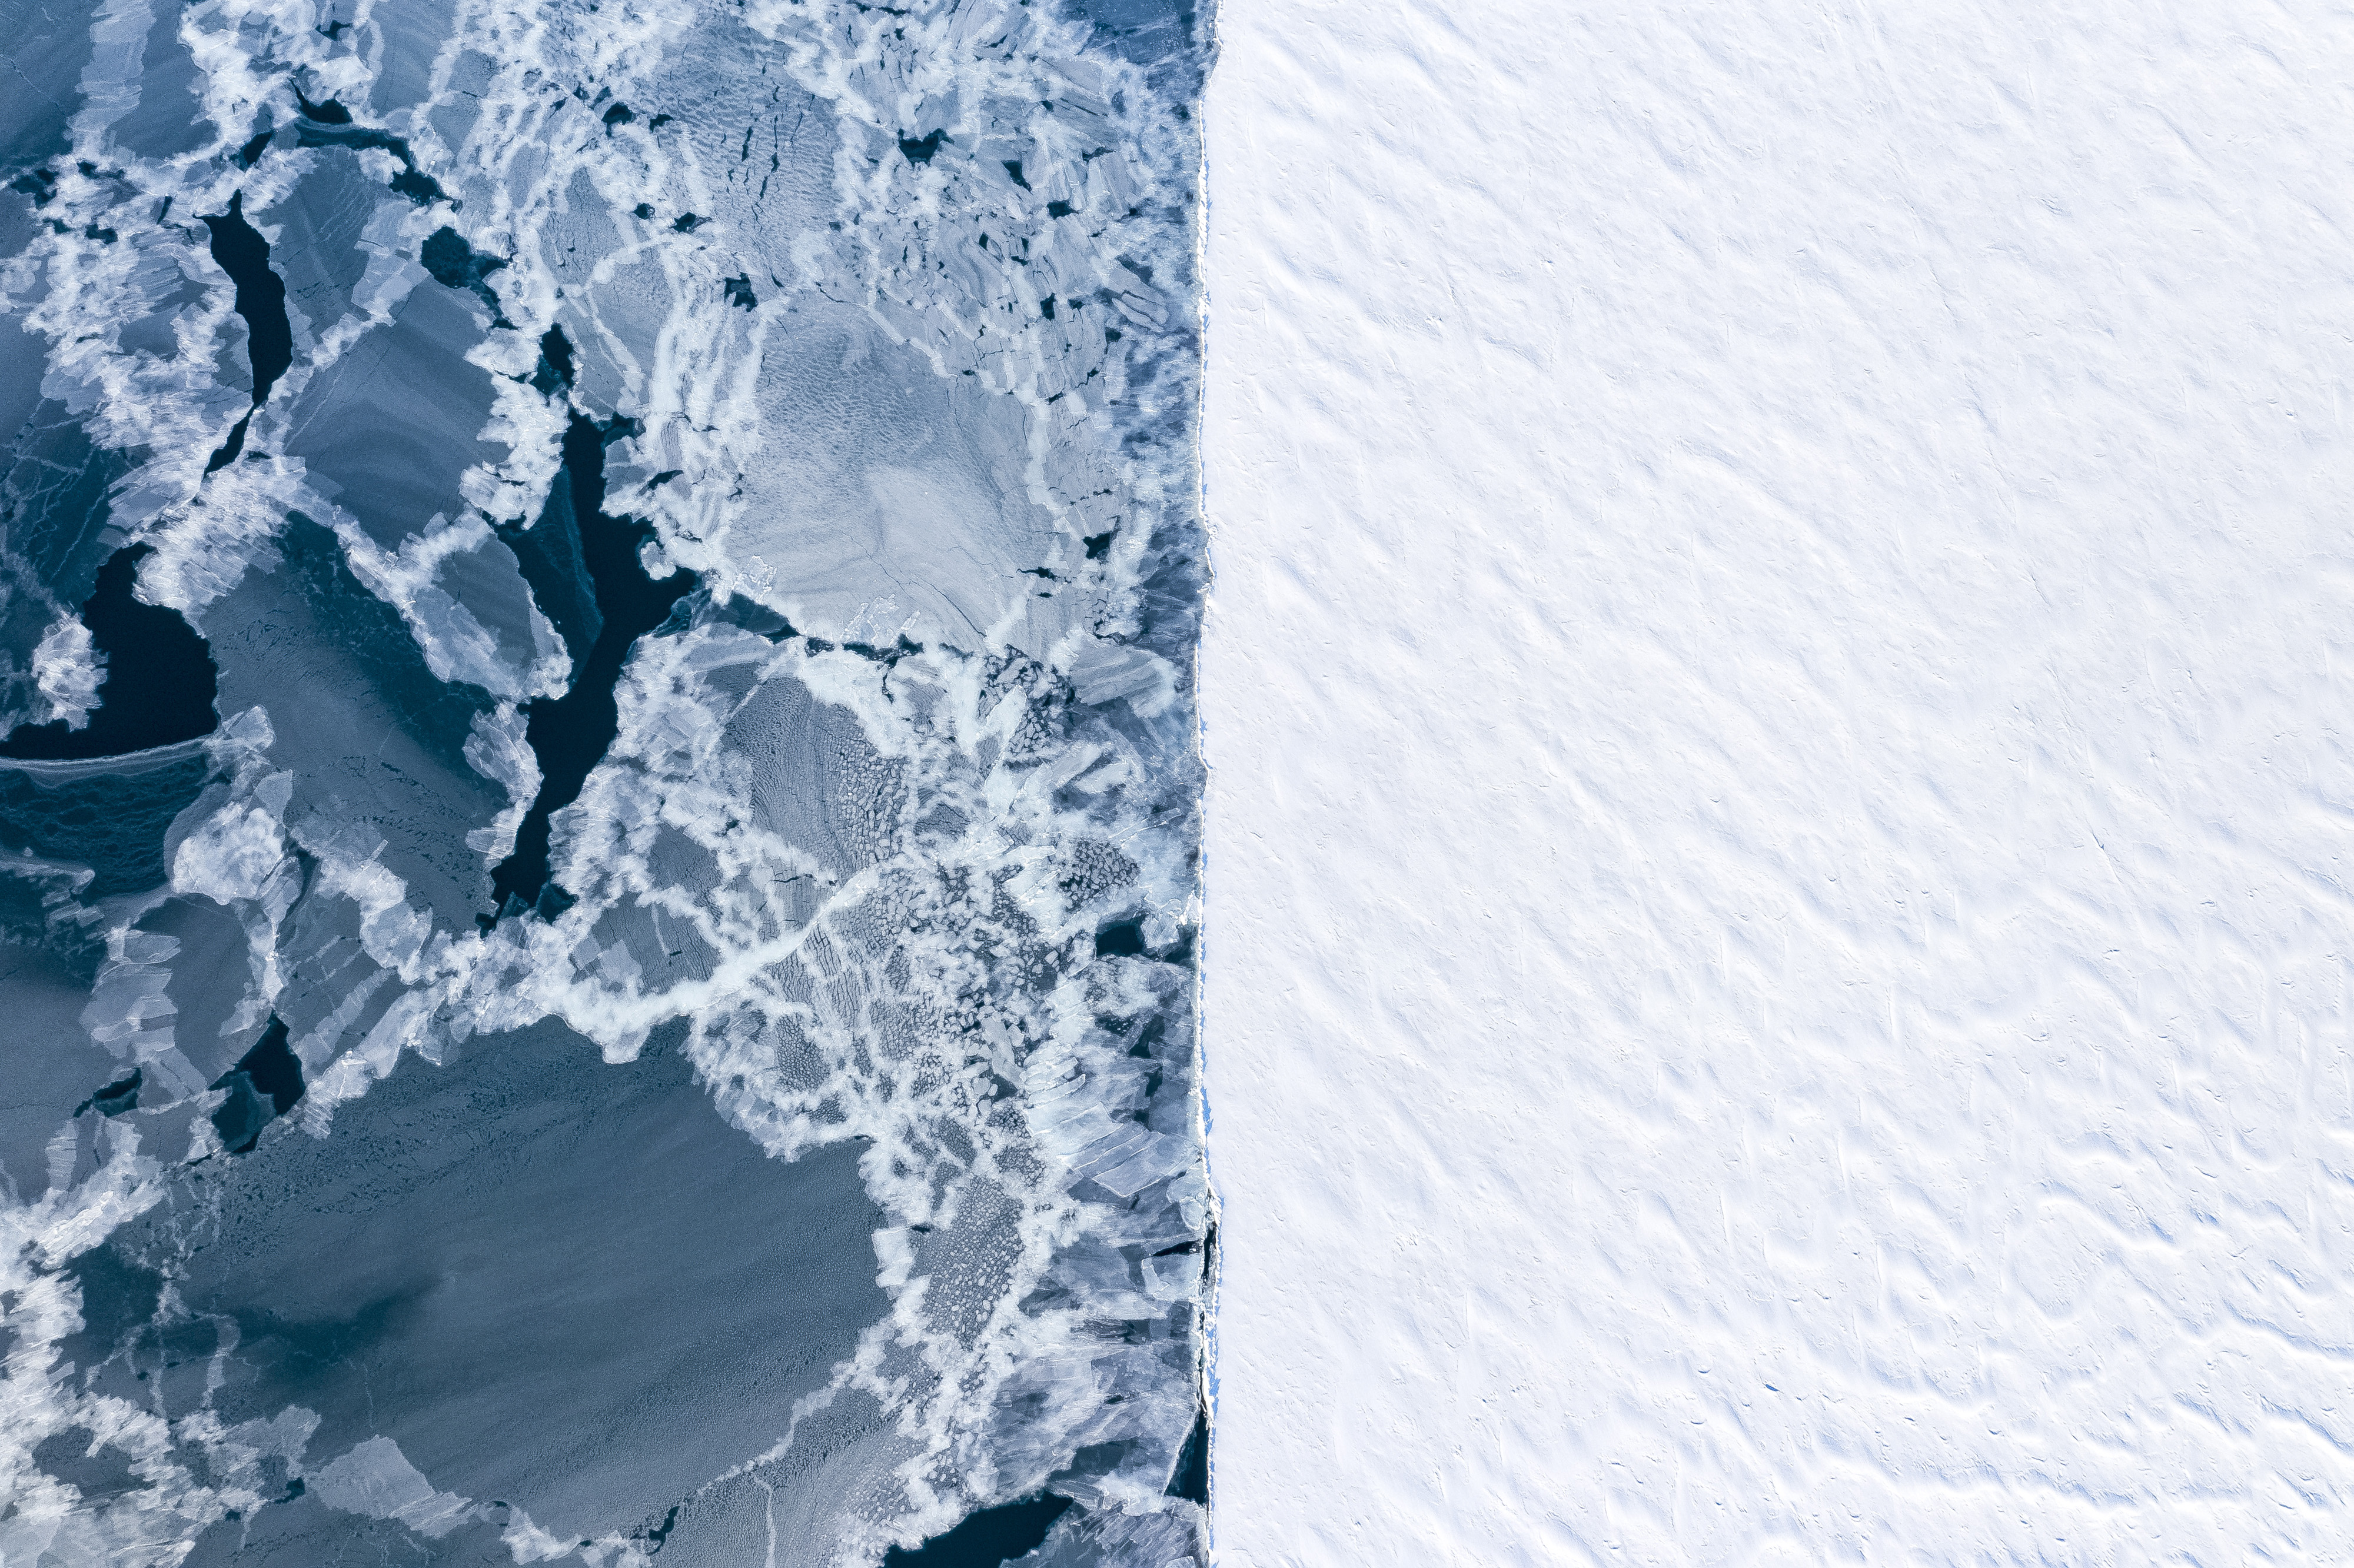 'Two world'. Aerial view of two different type of ice in winter. On the right side, the well established fast ice, a solid environment for the bears, on the left, the open water refreezing after a storm took away the ice. Sea ice being less thick than it used to be it is being more affected by the seasonal winter storm, easily breaking apart. © Florian Ledoux/TNC Photo Contest